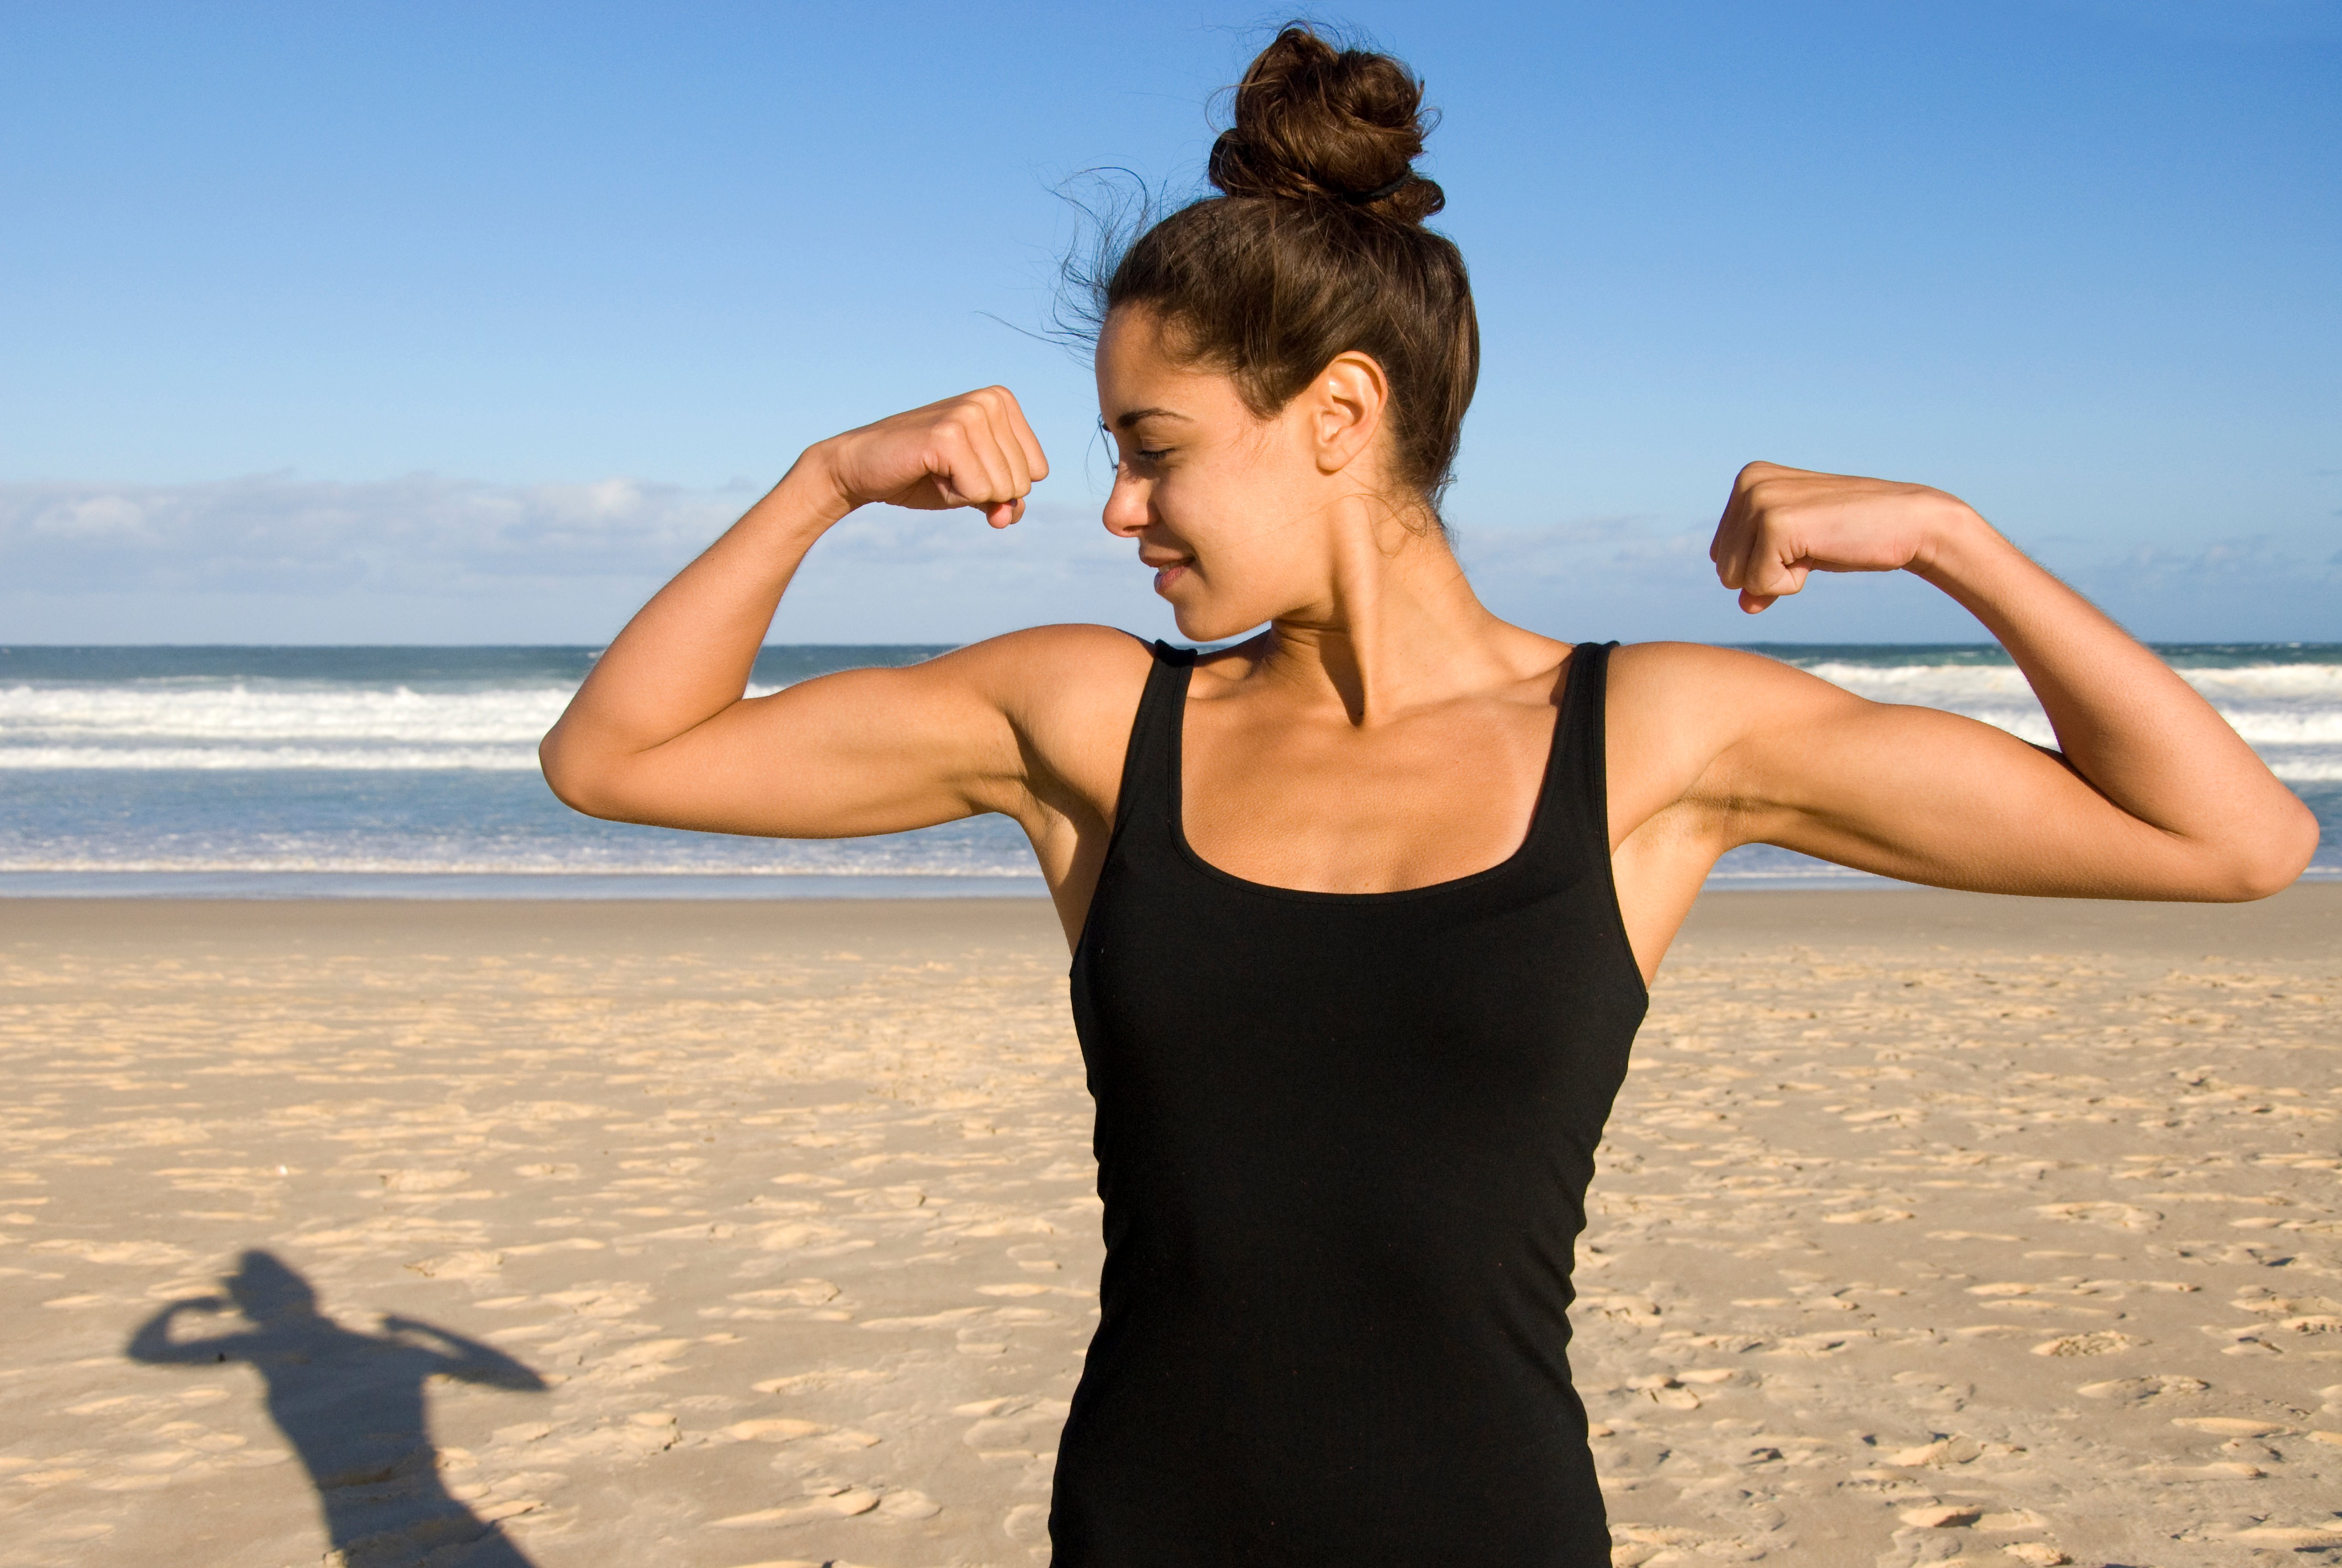 woman showing biceps standing on beach, strength, fitness